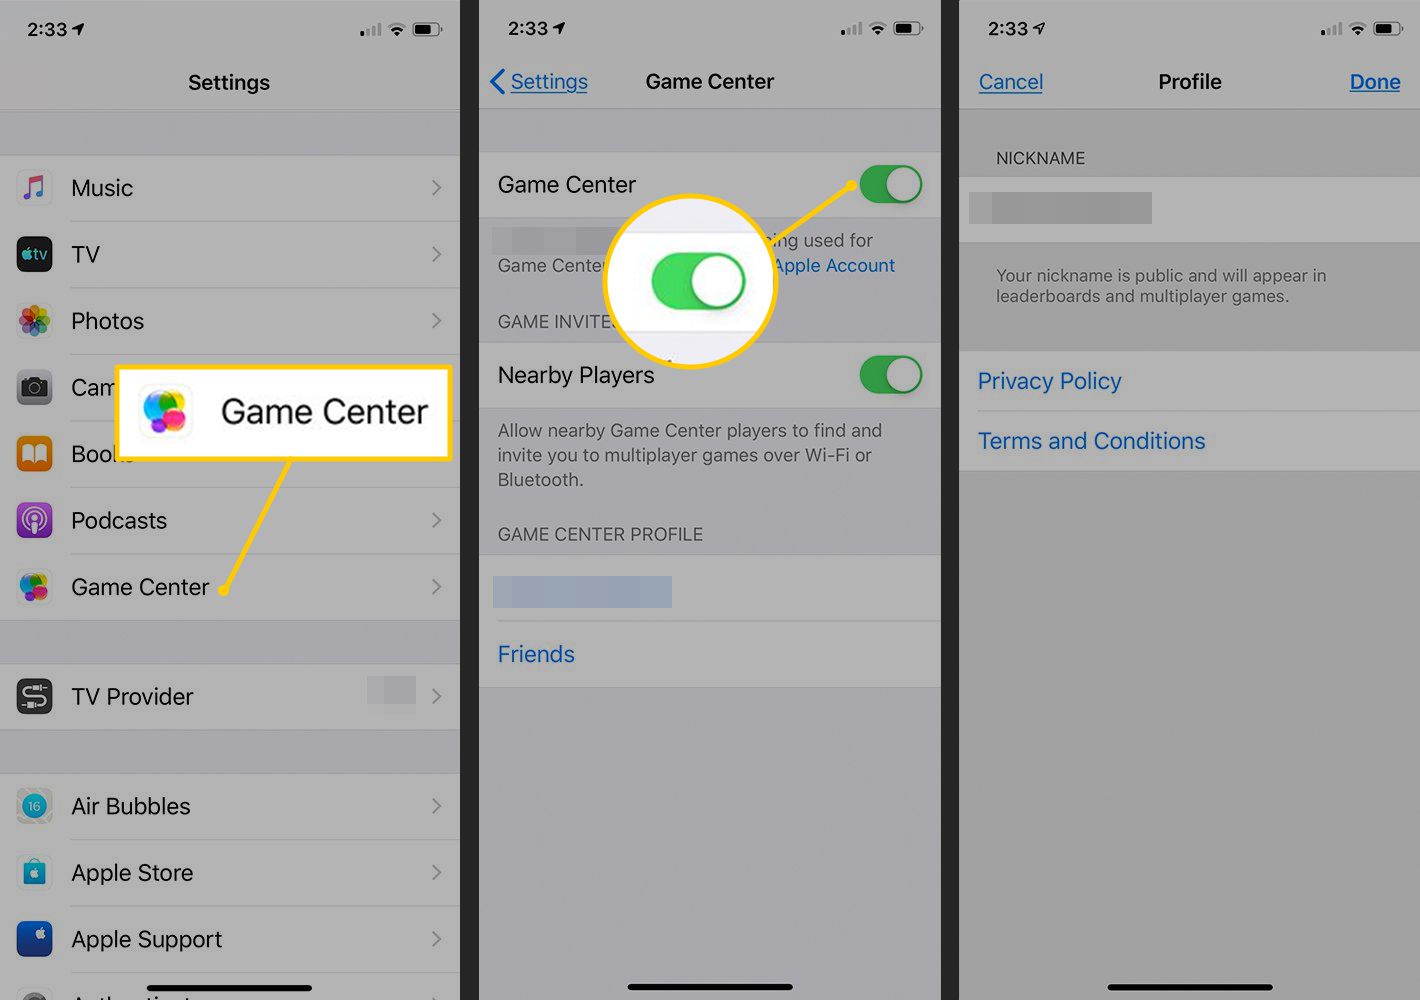 How to Transfer Google Play Games Data to Game Center